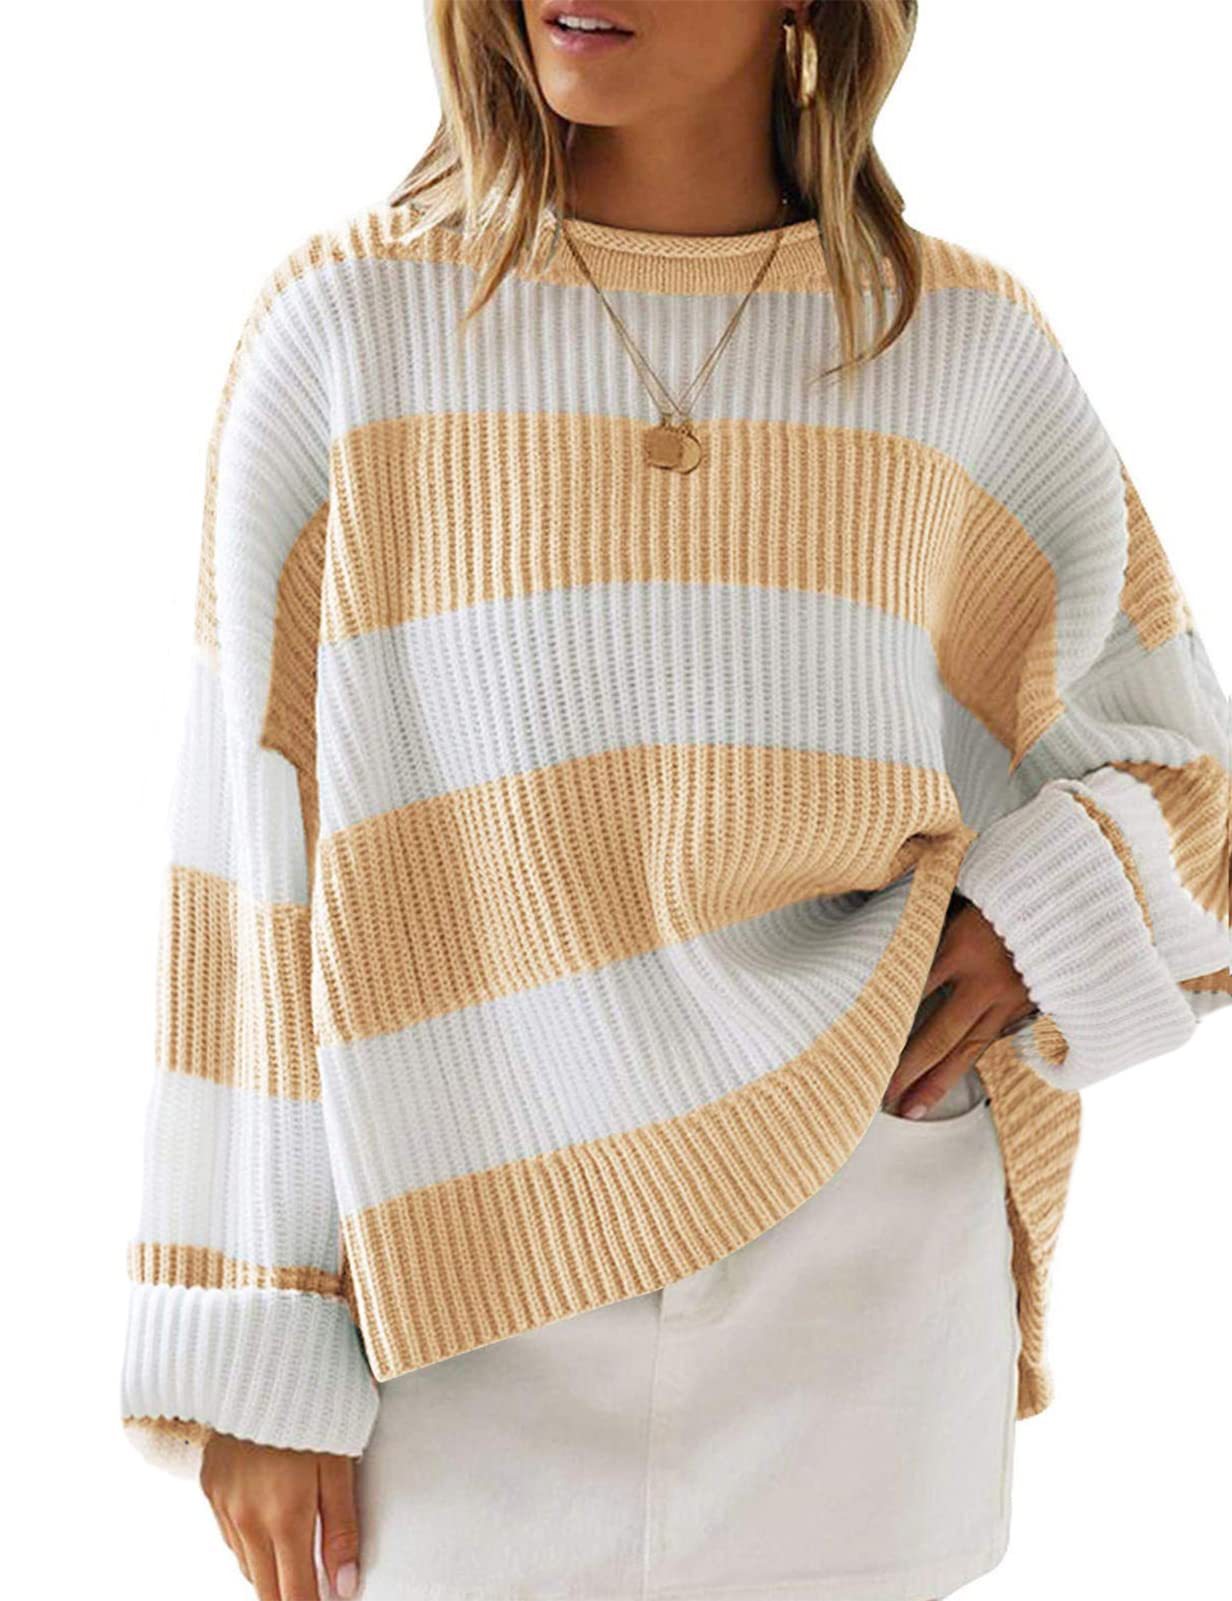 All About The Stripes Cropped Sweater